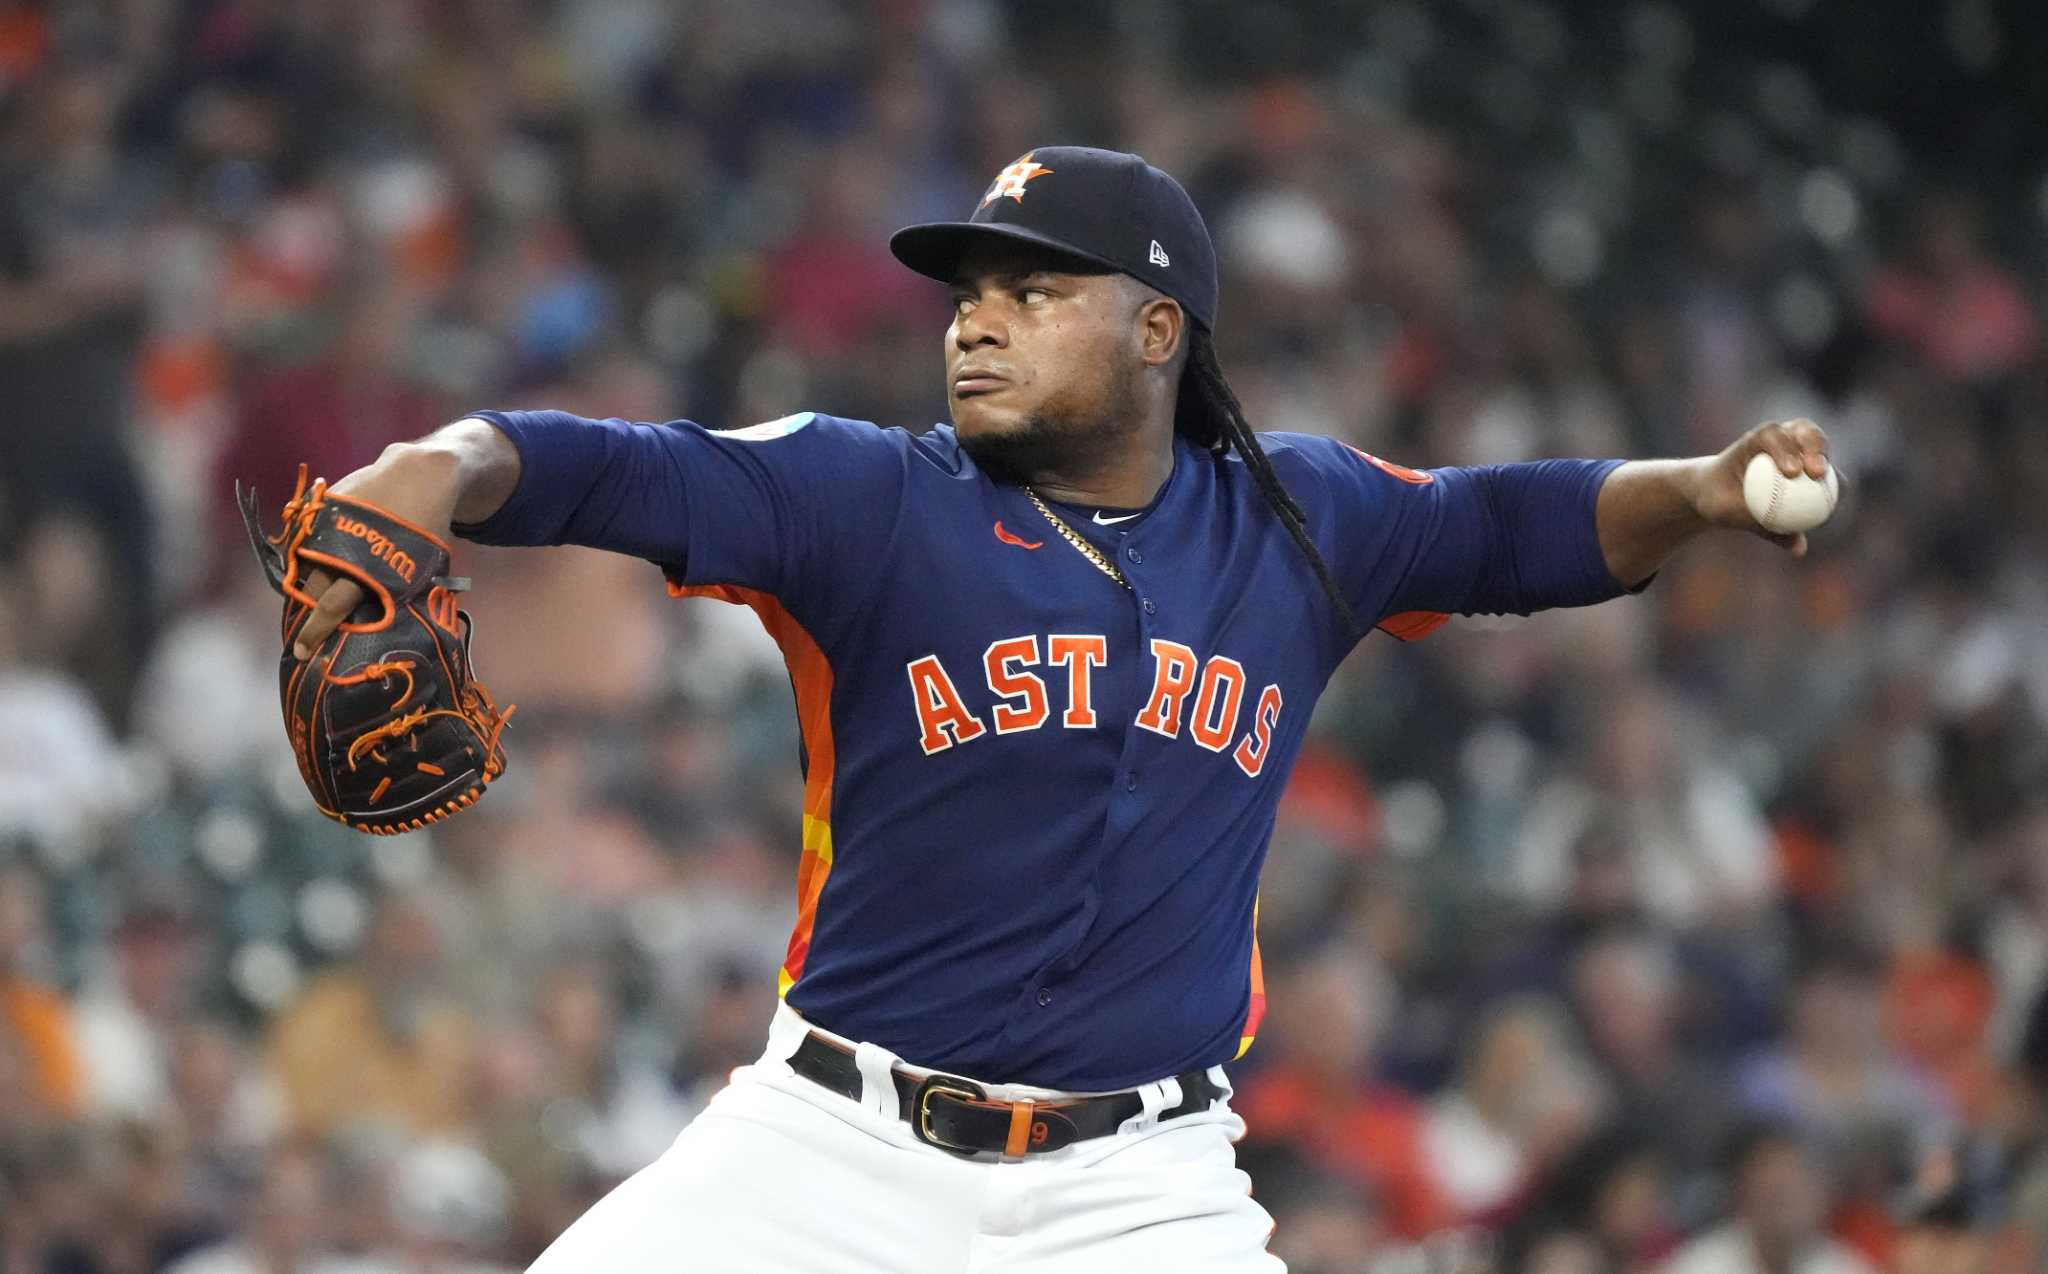 Houston Astros: Home woes continue in dropping finale vs. Giants